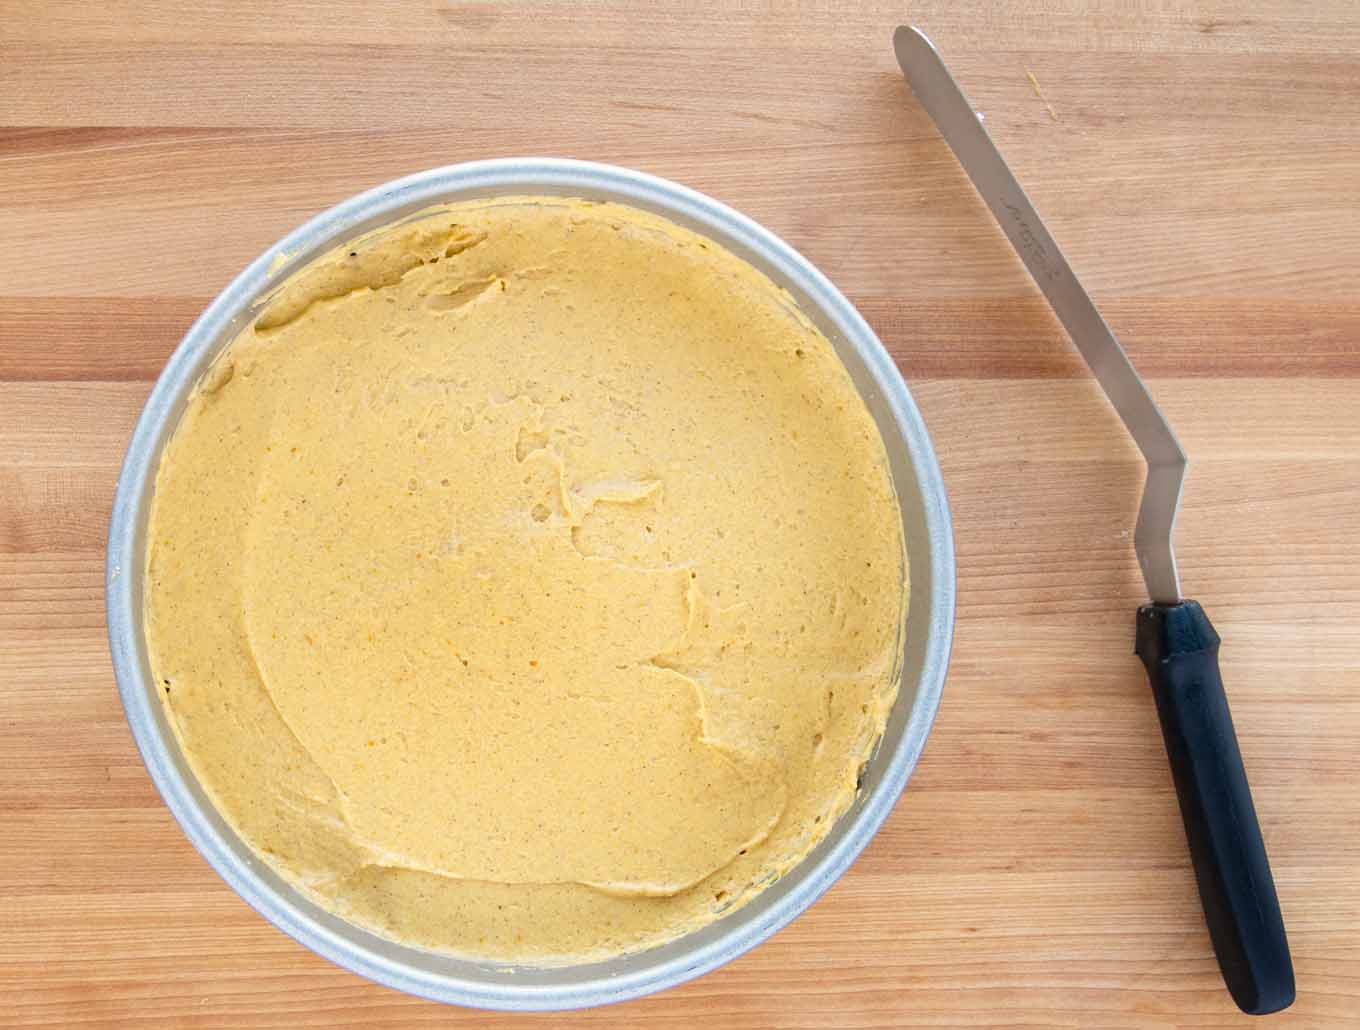 pumpkin cake batter added to cake pan with a black handled spatula next to it